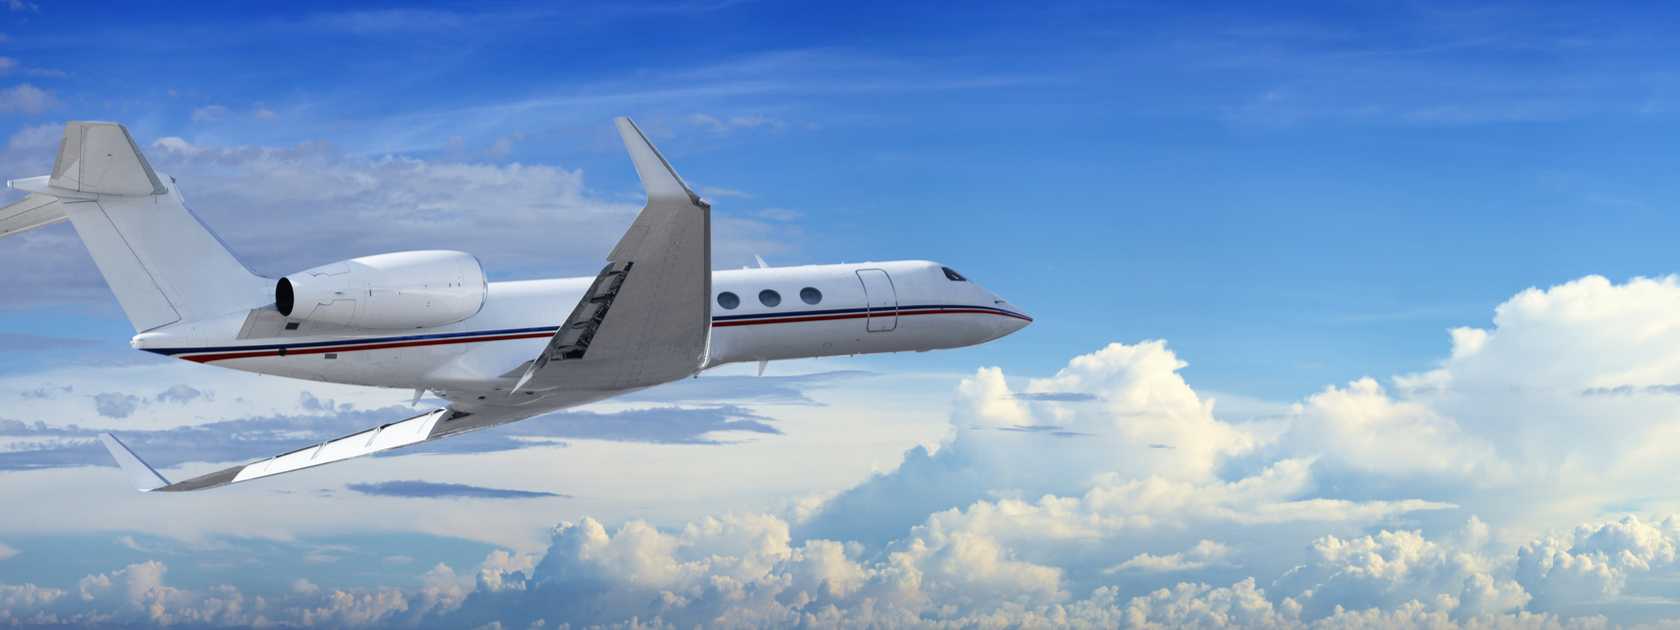 Top 4 Reasons Private Jet Charter is Safer Than Commercial Airlines